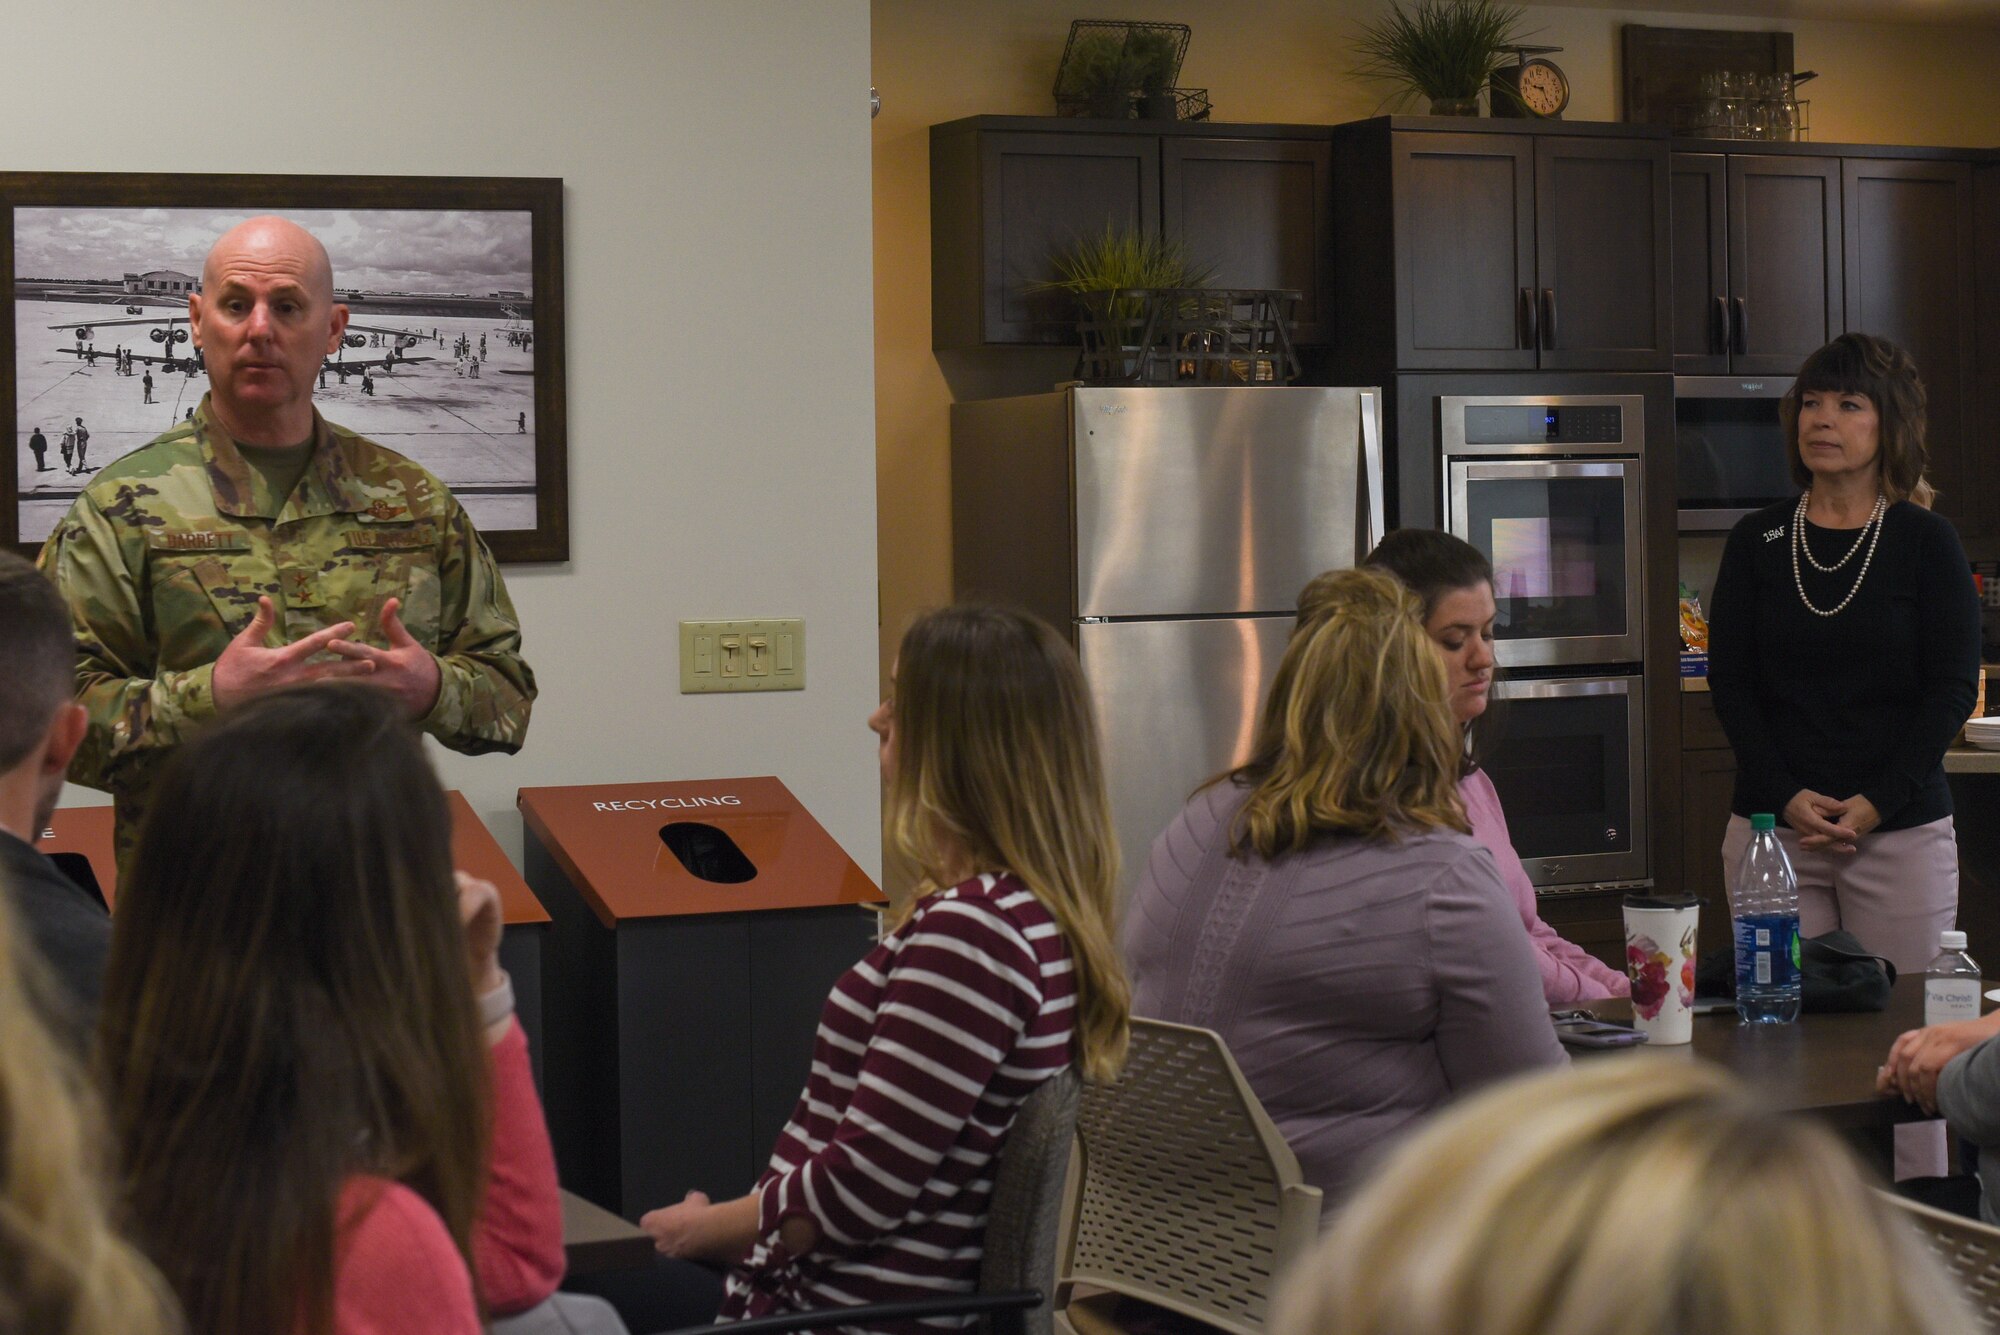 Maj. Gen. Sam Barrett, 18th Air Force commander and his wife, Mrs. Kelly Barrett, meet with Key Spouses of McConnell Air Force Base, Kan. May 2, 2019. The Key Spouses are chosen by the Squadron commander to offer assistance to families during crisis and provide family readiness information. (U.S. Air Force photo by Airman 1st Class Alexi Myrick)